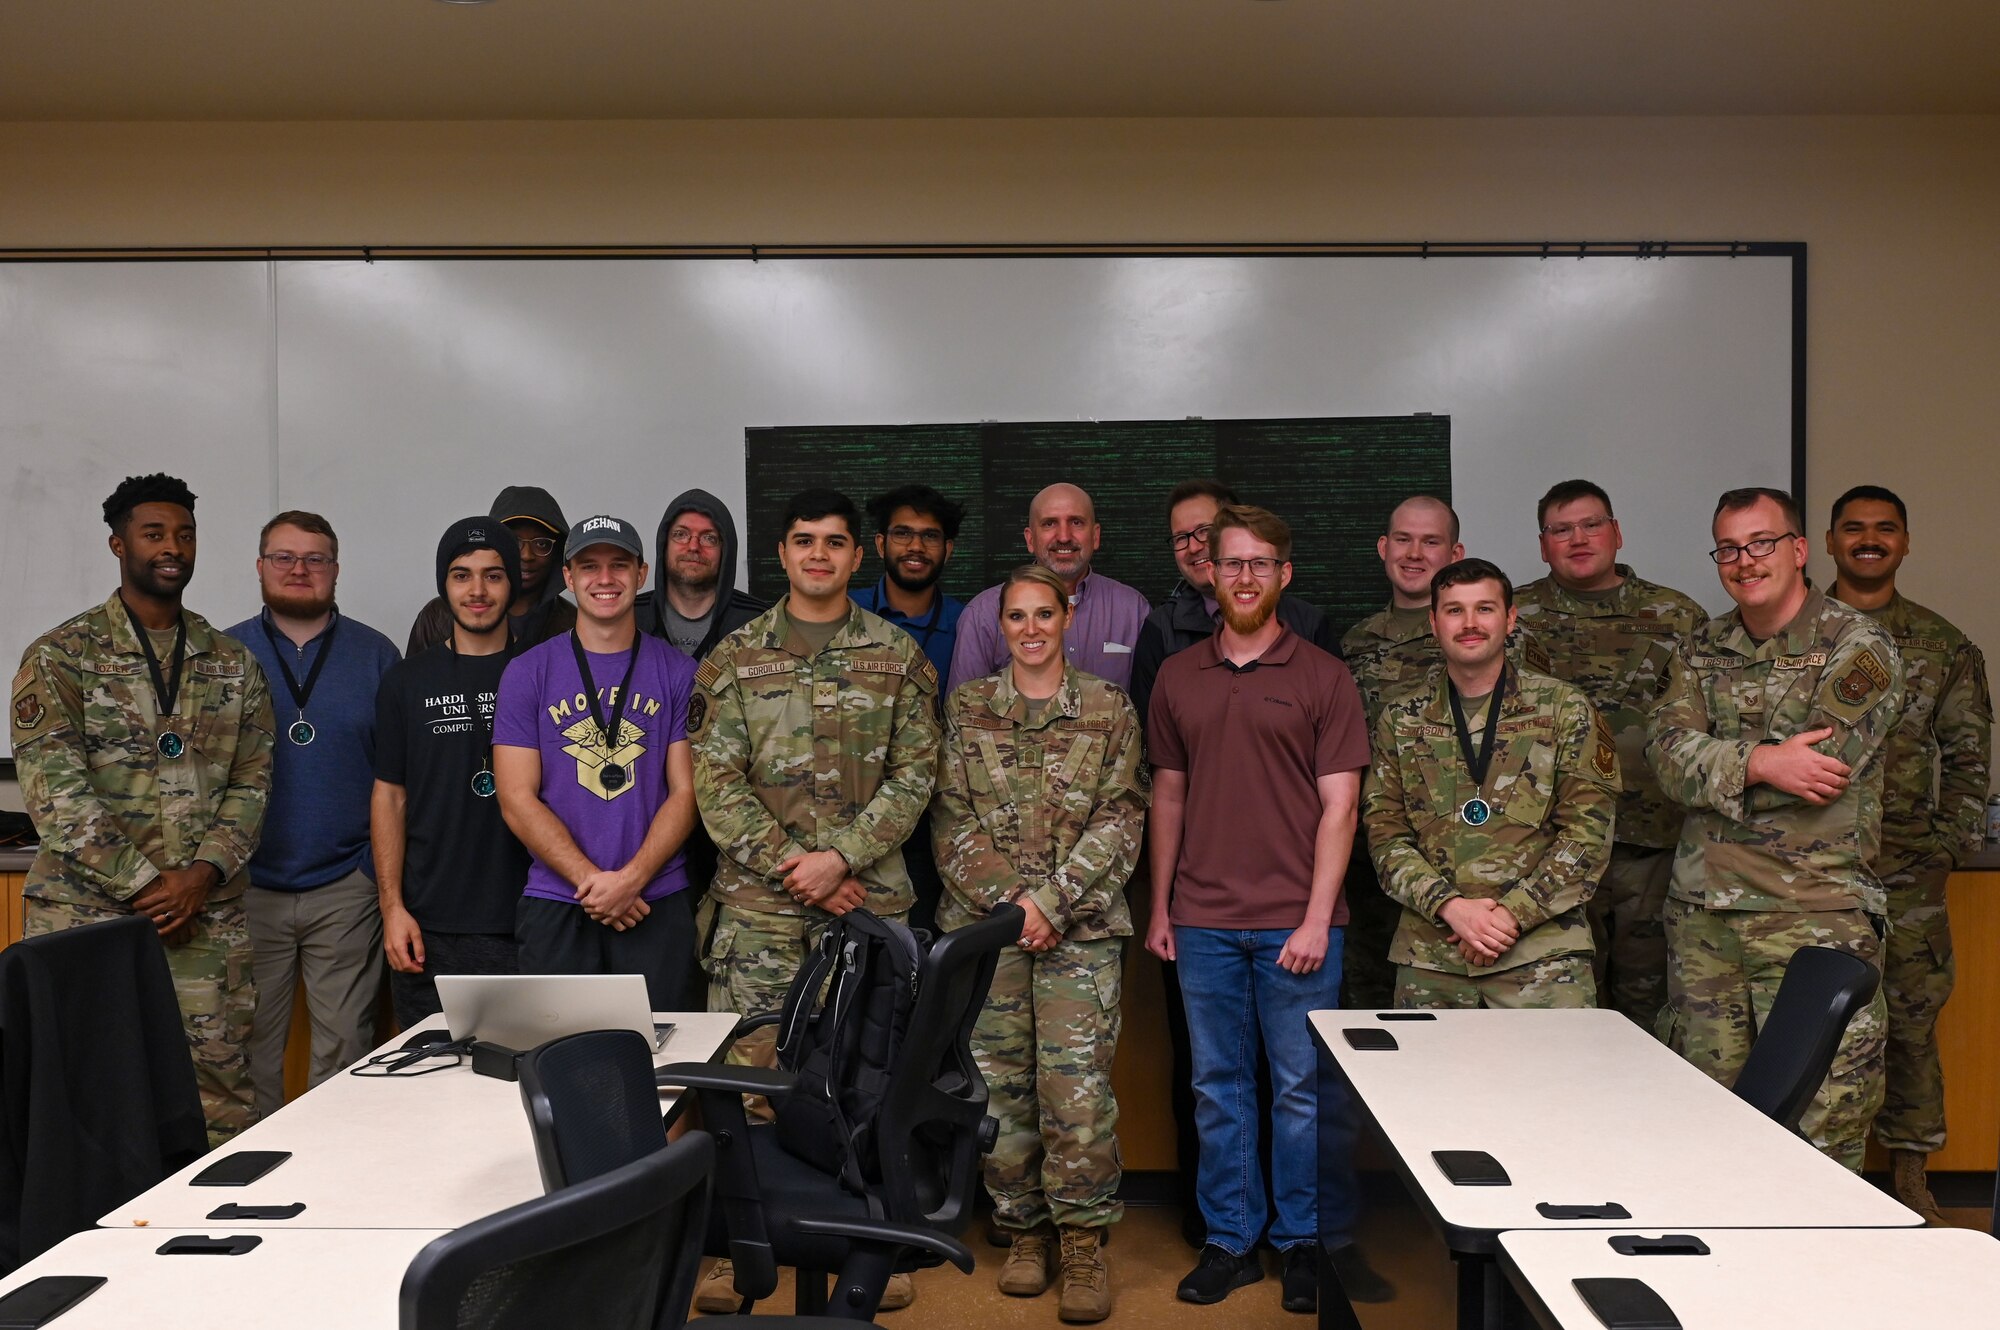 Members from Dyess and Hardin-Simmons University pose for a group photo at the end of the Hackathon event on Dyess Air Force Base, Texas, Oct. 26, 2023. The Hackathon was the first of its kind at Dyess. Airmen learned new skills in hacking and server creation to bring more multi-capable Airmen to the force while strengthening Dyess’ partnership with HSU. (U.S. Air Force photo by Senior Airman Sophia Robello)